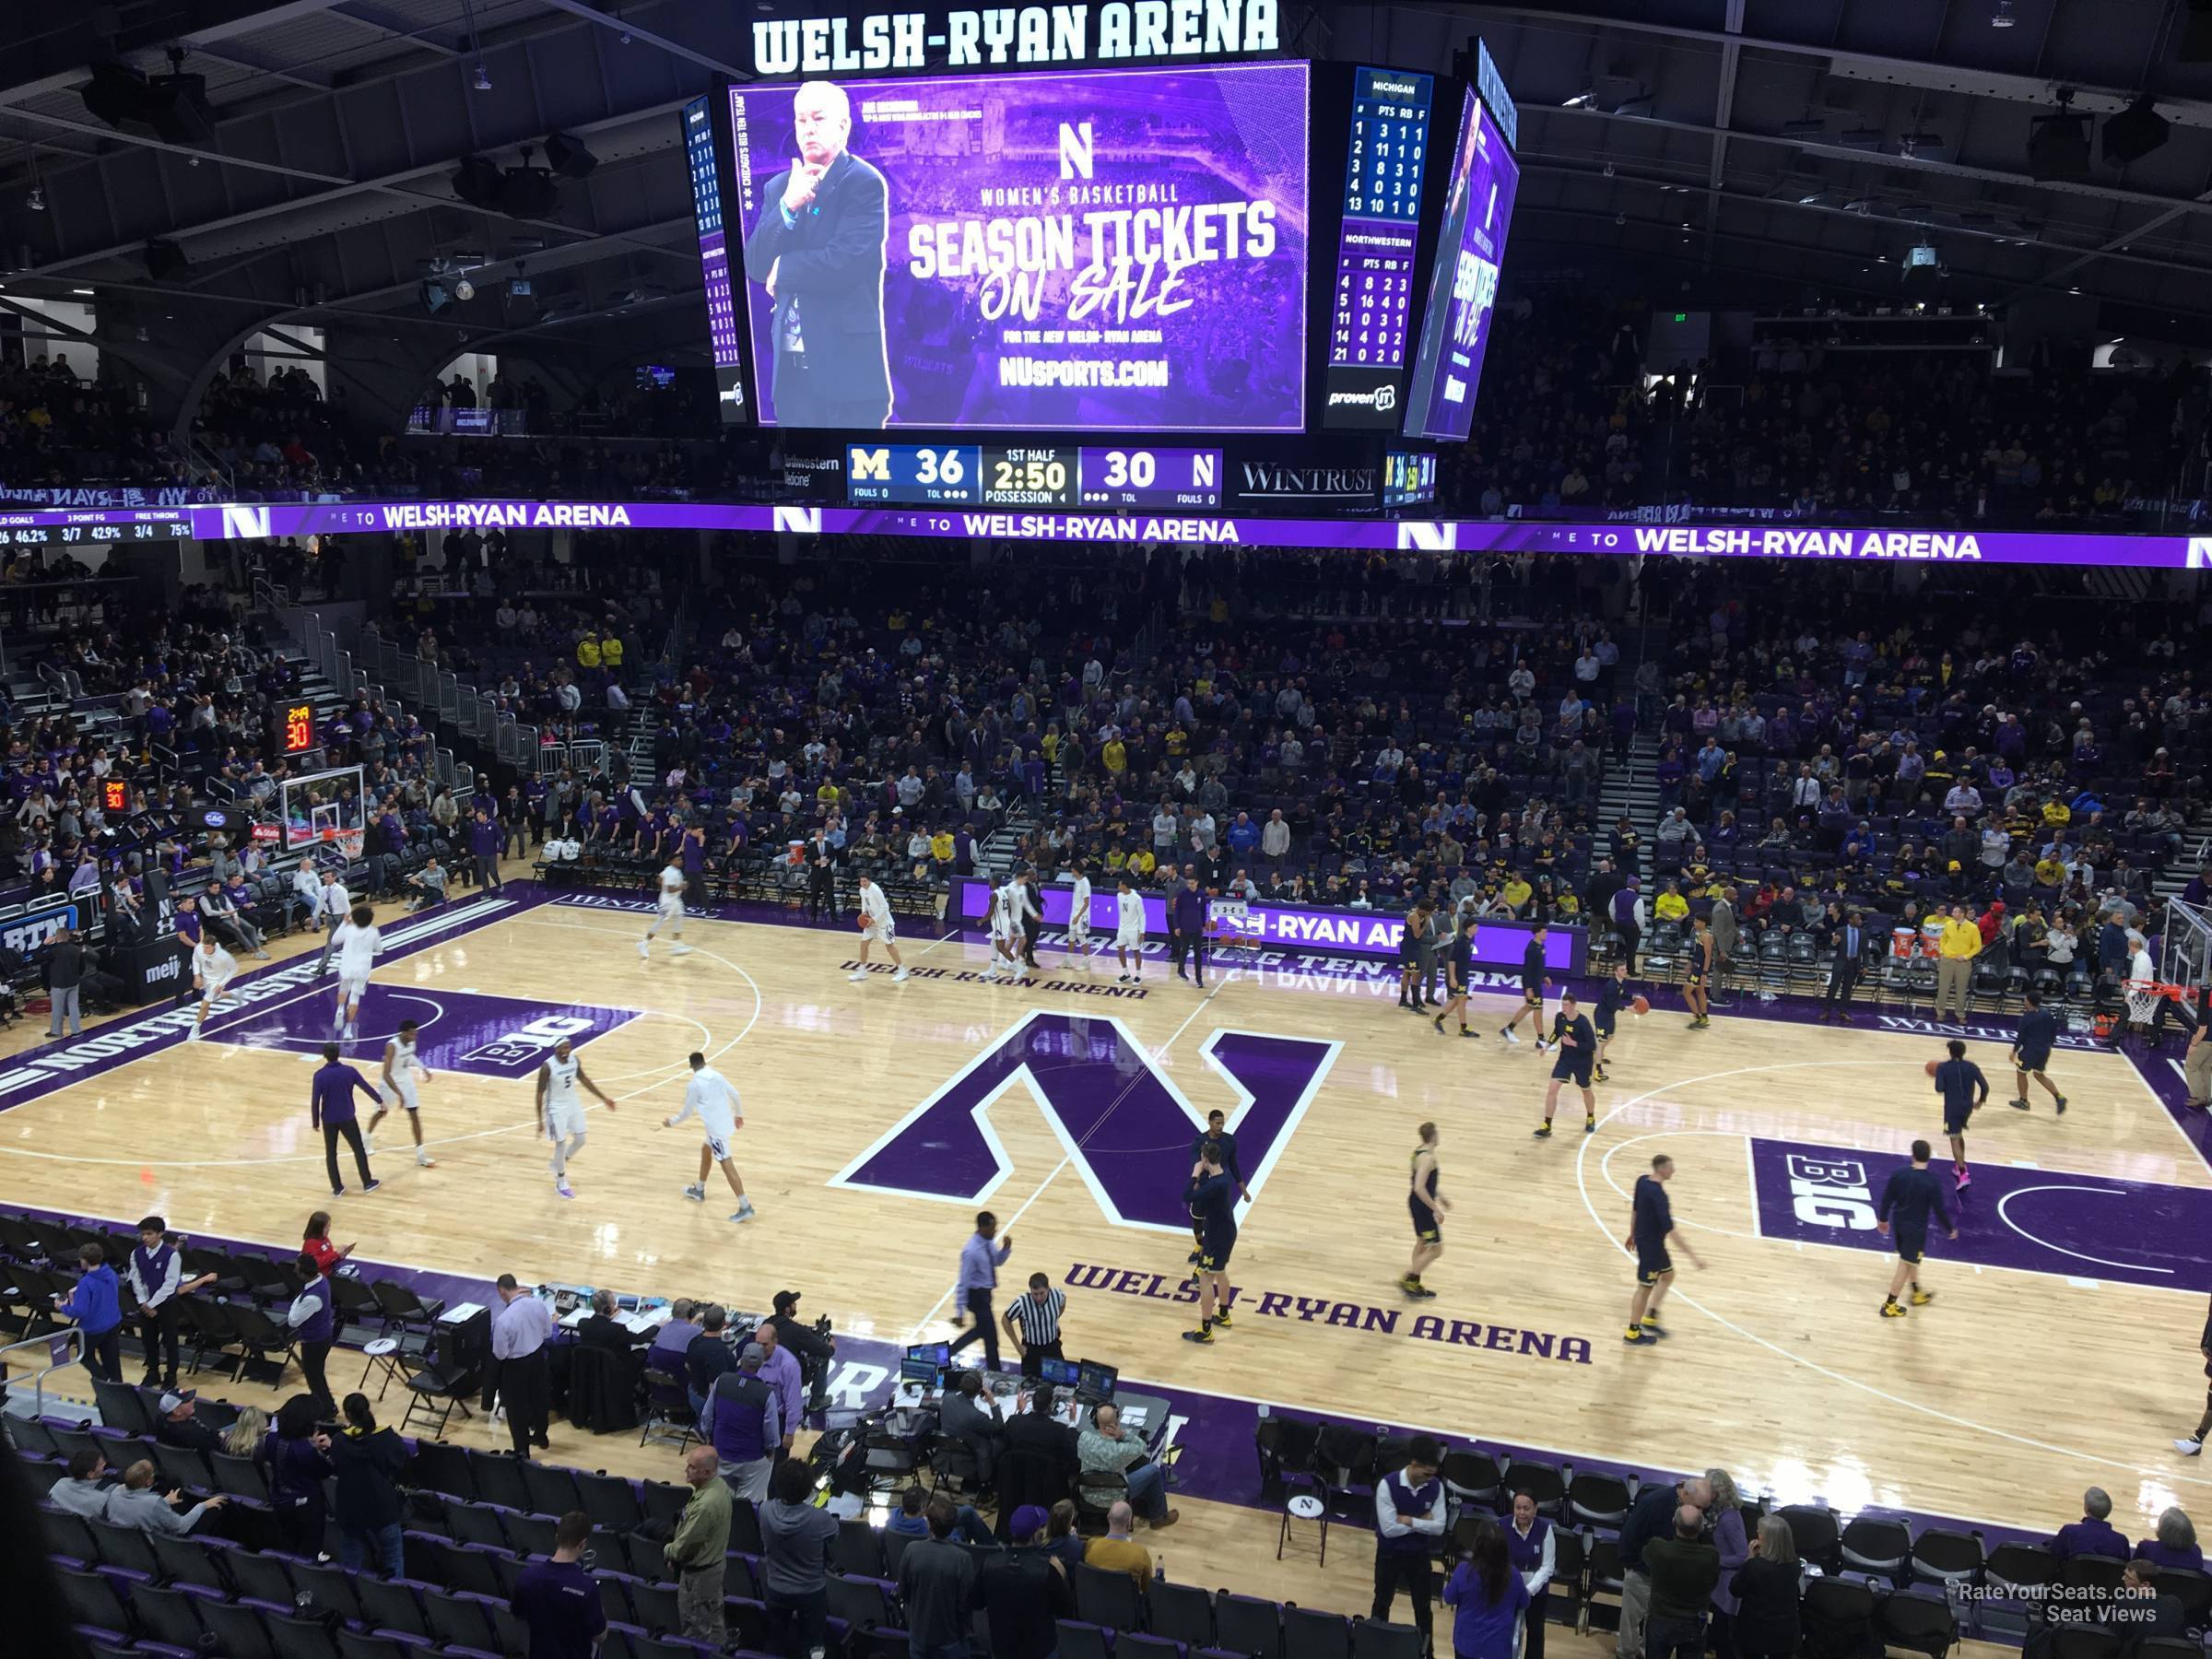 section 218, row 1 seat view  - welsh-ryan arena